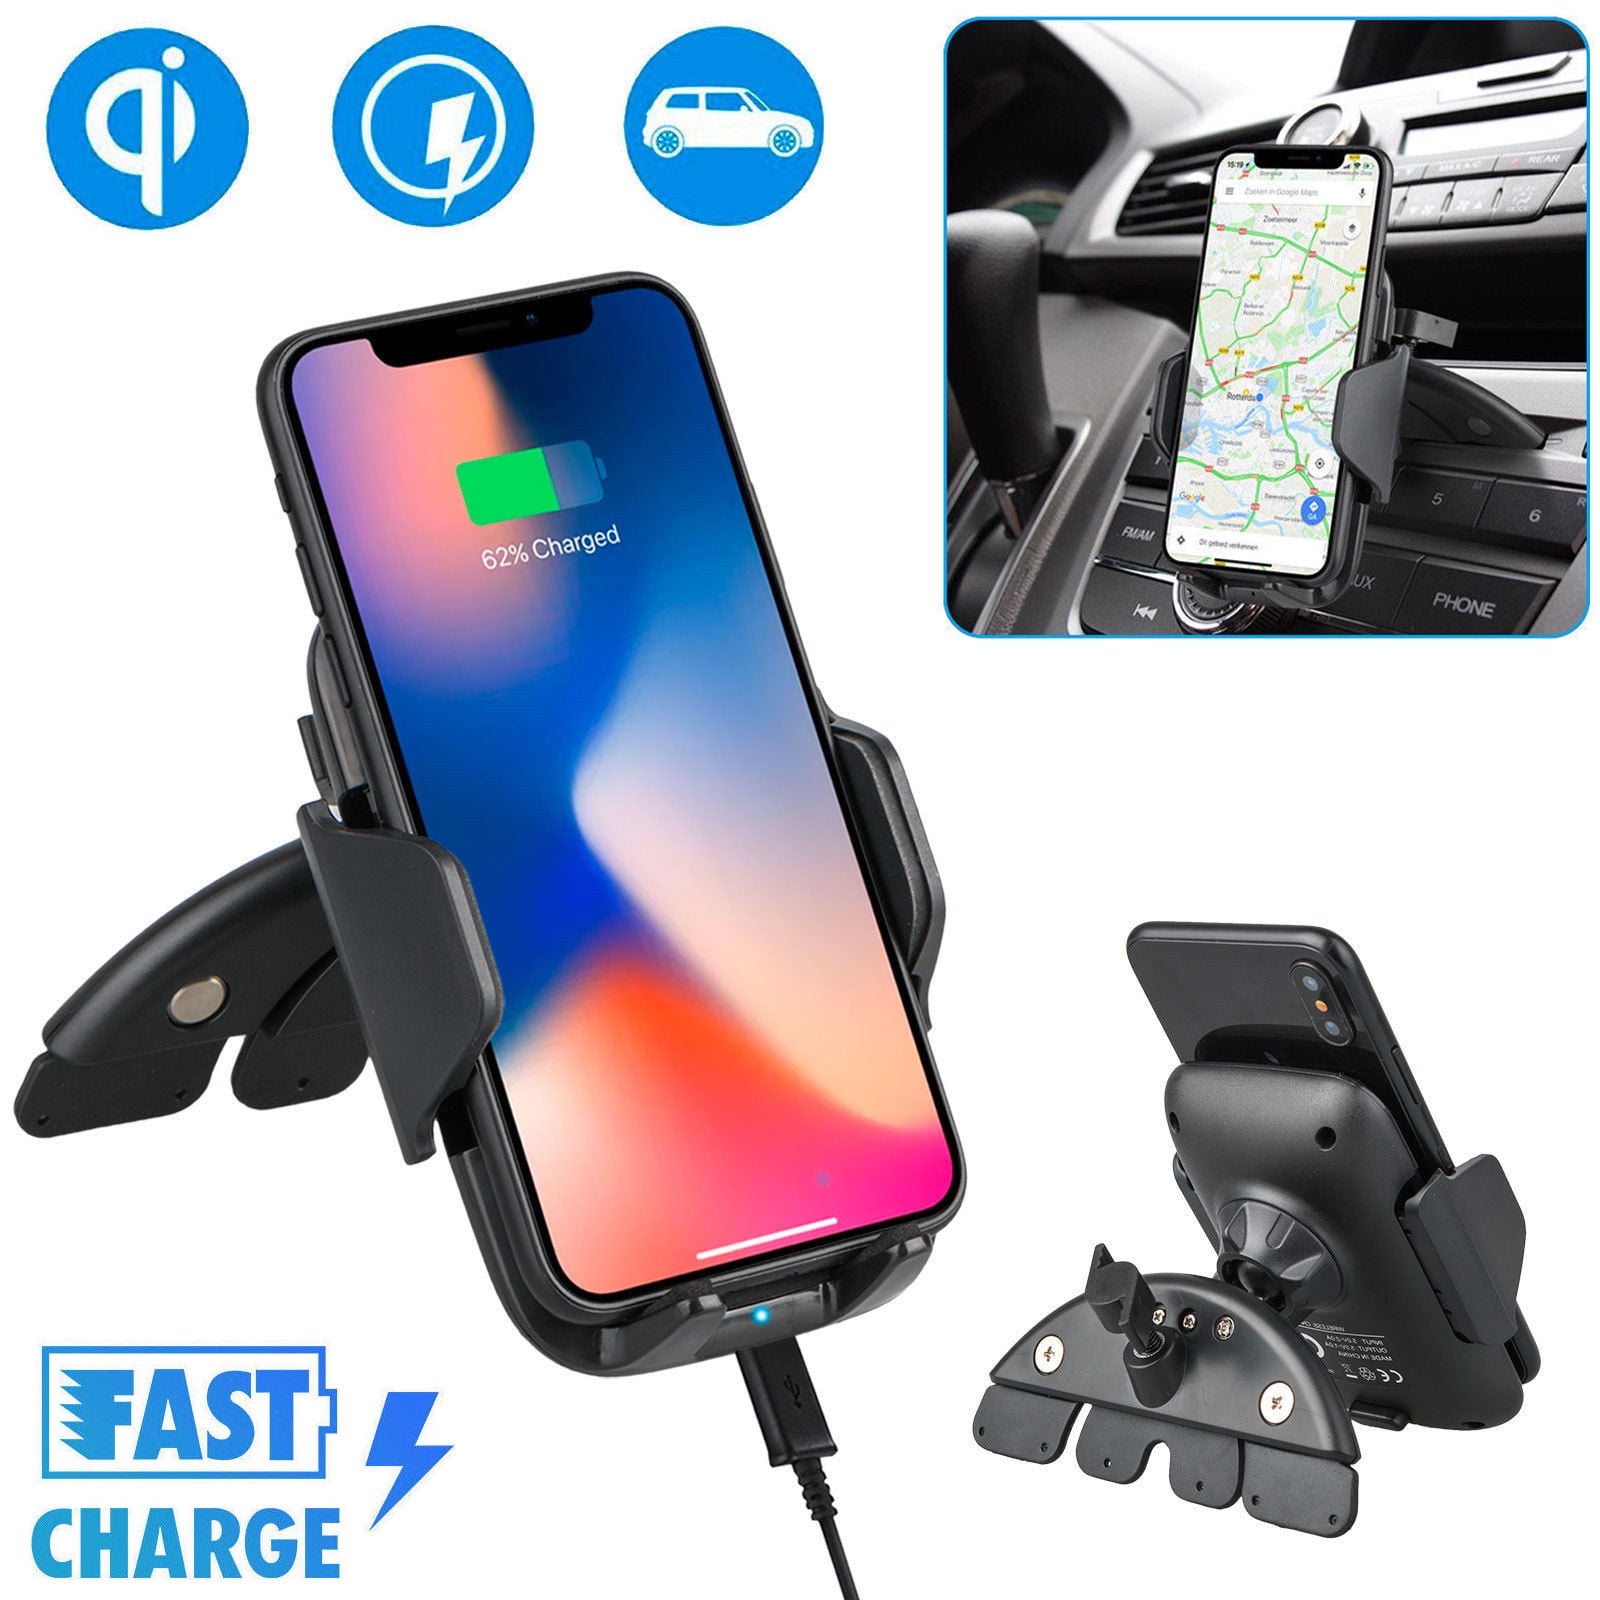 2020 Upgraded Wireless Charger Phone Mount Automatic Clamping 15W Fast Charging Car Phone Holder Wireless Car Charger Compatible with iPhone 11 Pro/Max/XR,Samsung S20/S10/S9/S8 and All Smartphones